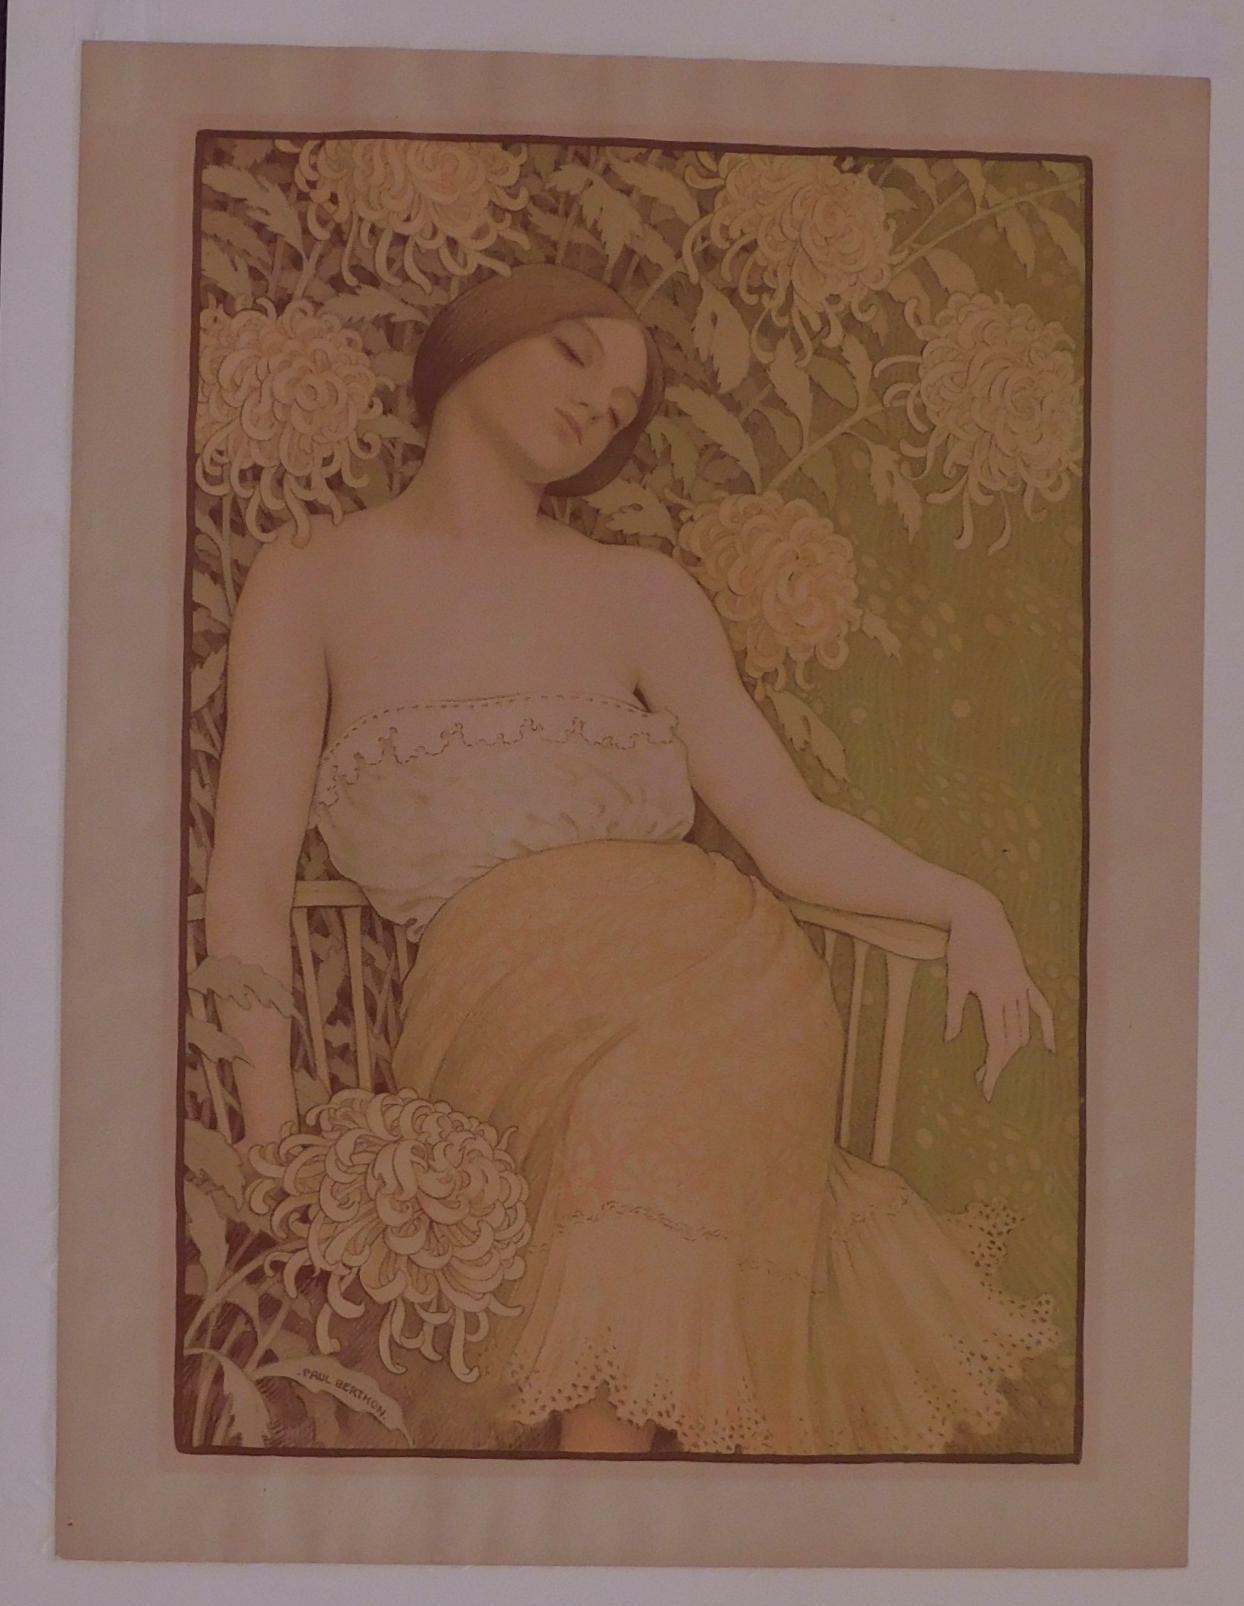 Wonderful original color lithograph by Paul Berthon (1872-1909).
In excellent condition with great color. Unframed. Presents in a 4-Ply Archival Mat.
Titled: 